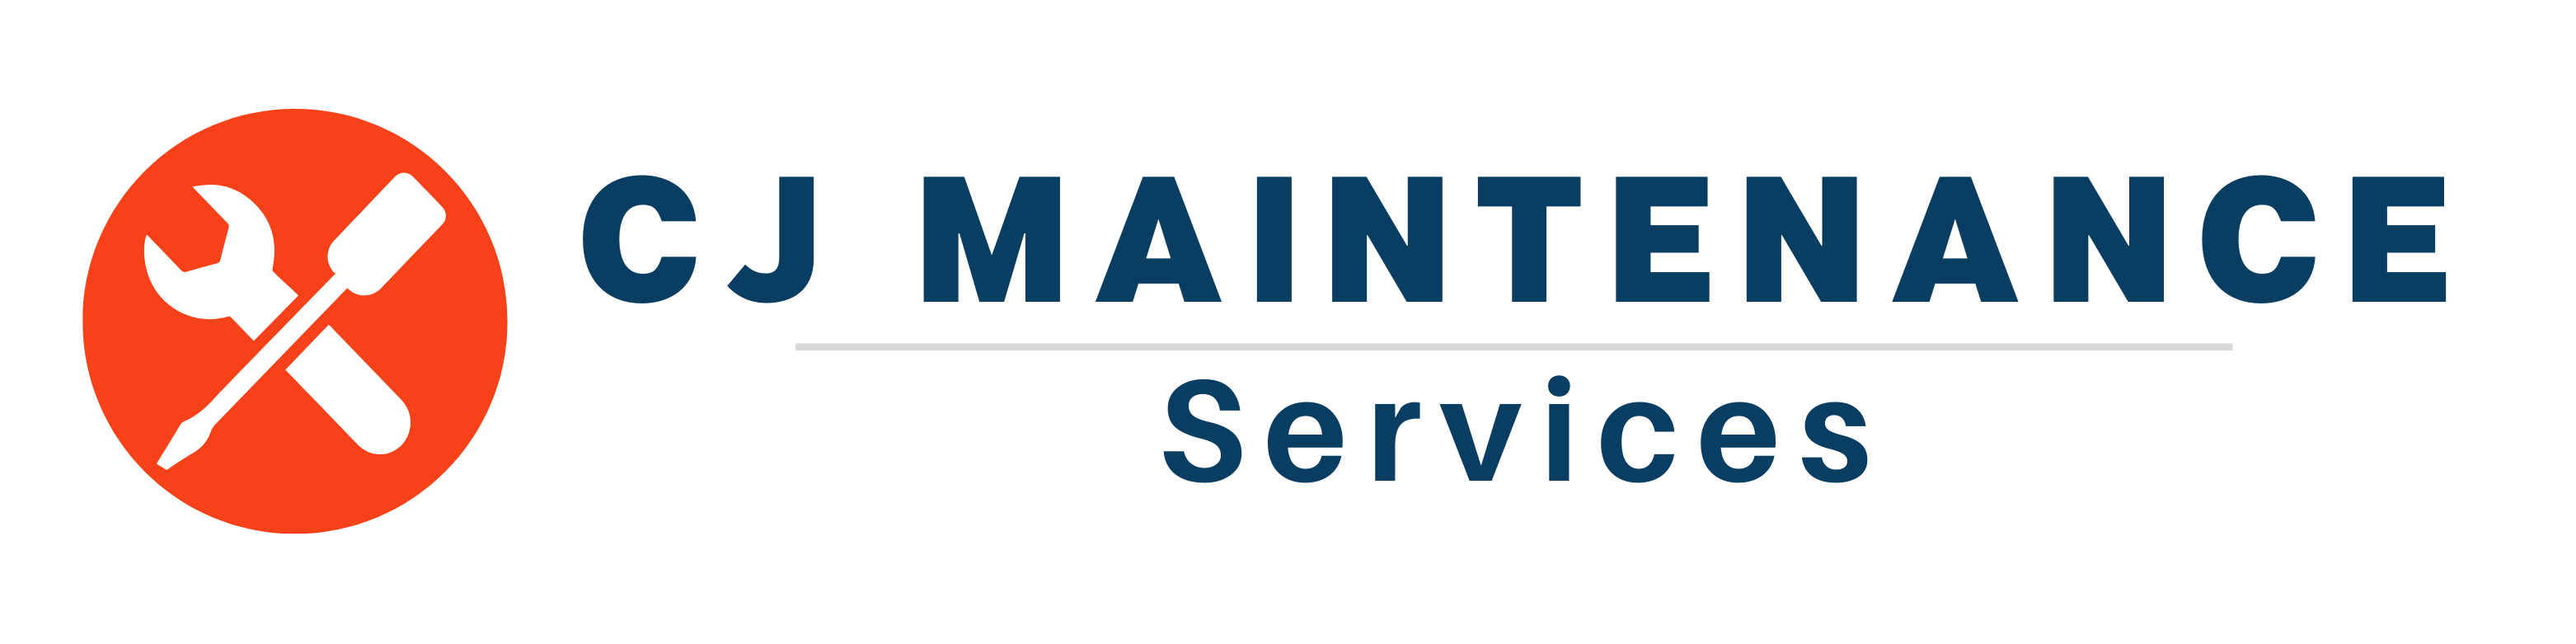 Logo of CJ Maintenance Services Handyman Services In High Wycombe, Buckinghamshire